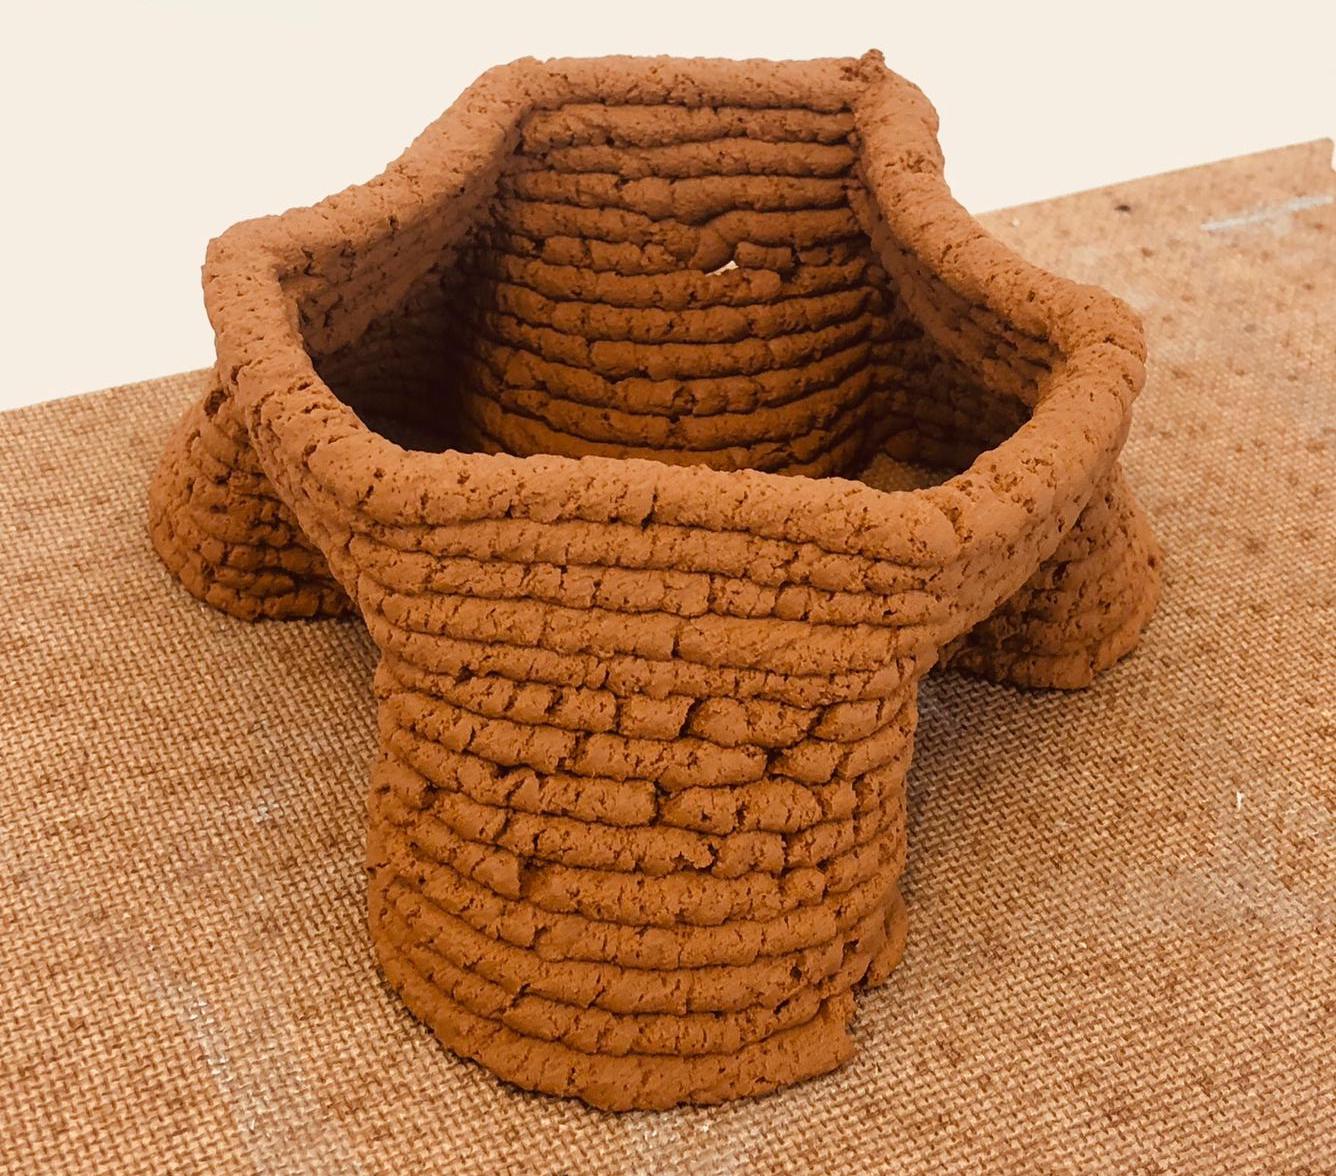 US researchers develop technique to 3D-print buildings out of any soil